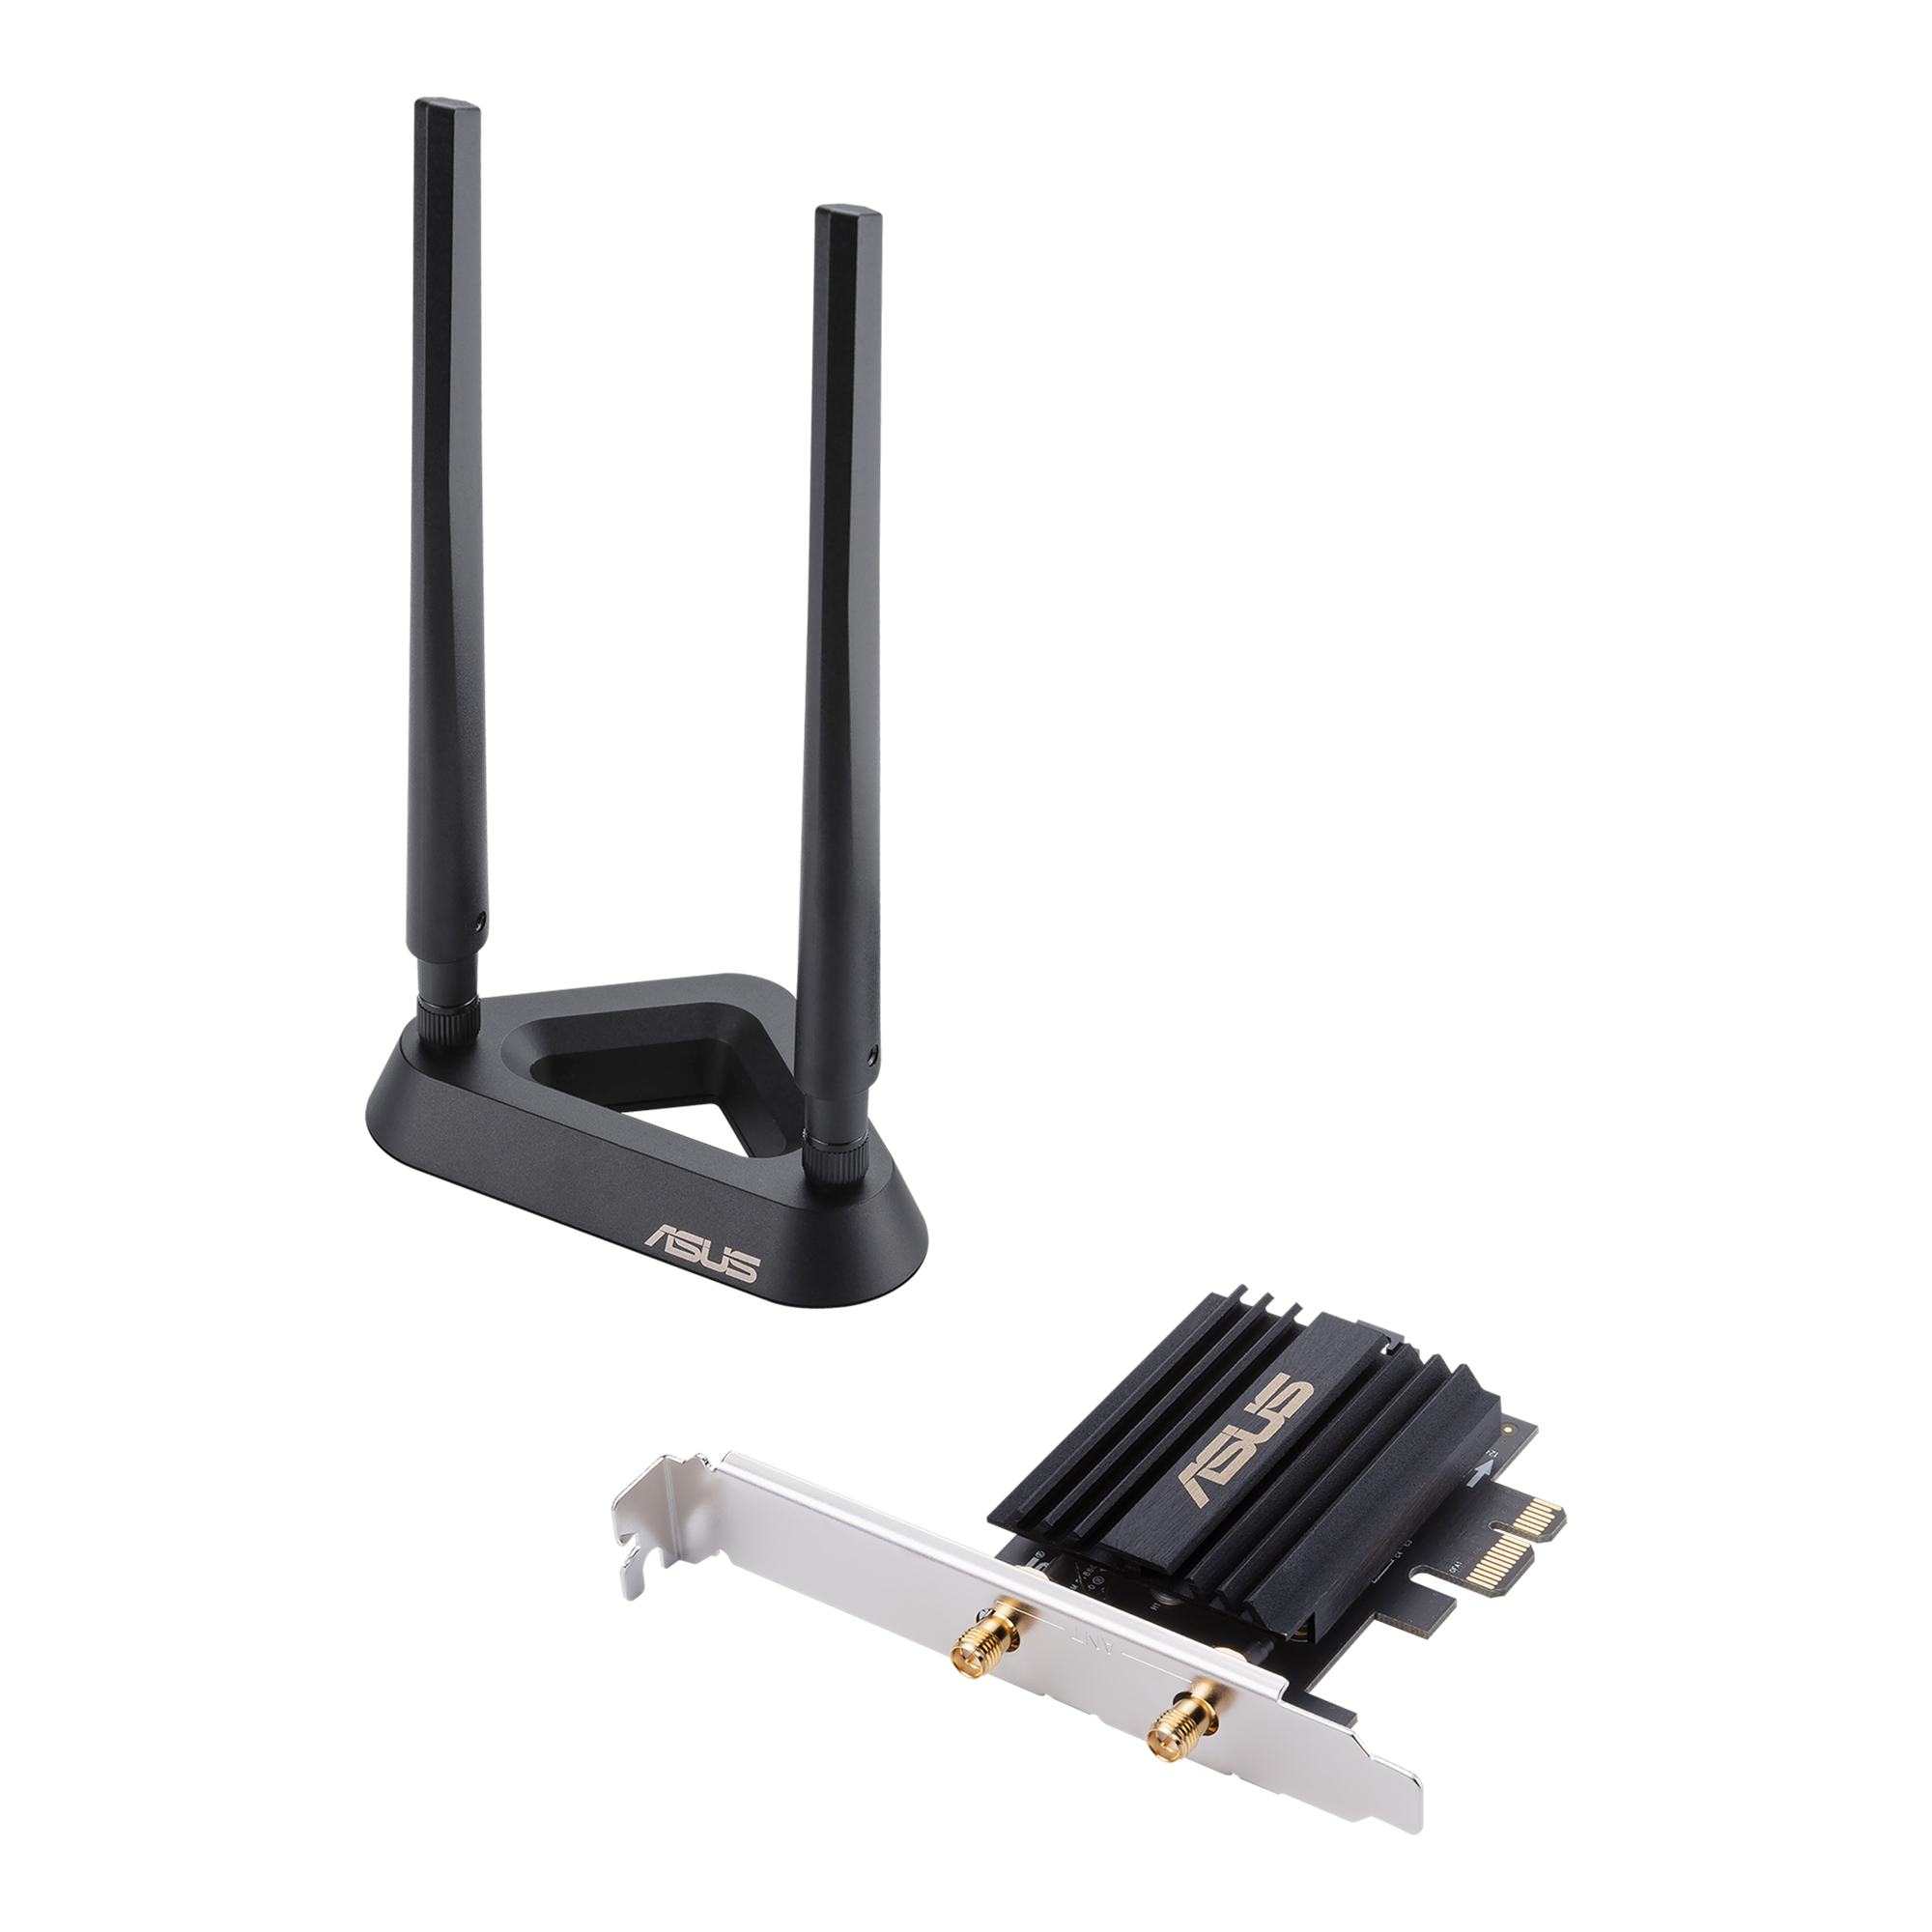 PCE-AX58BT｜Wireless & Wired Adapters｜ASUS USA